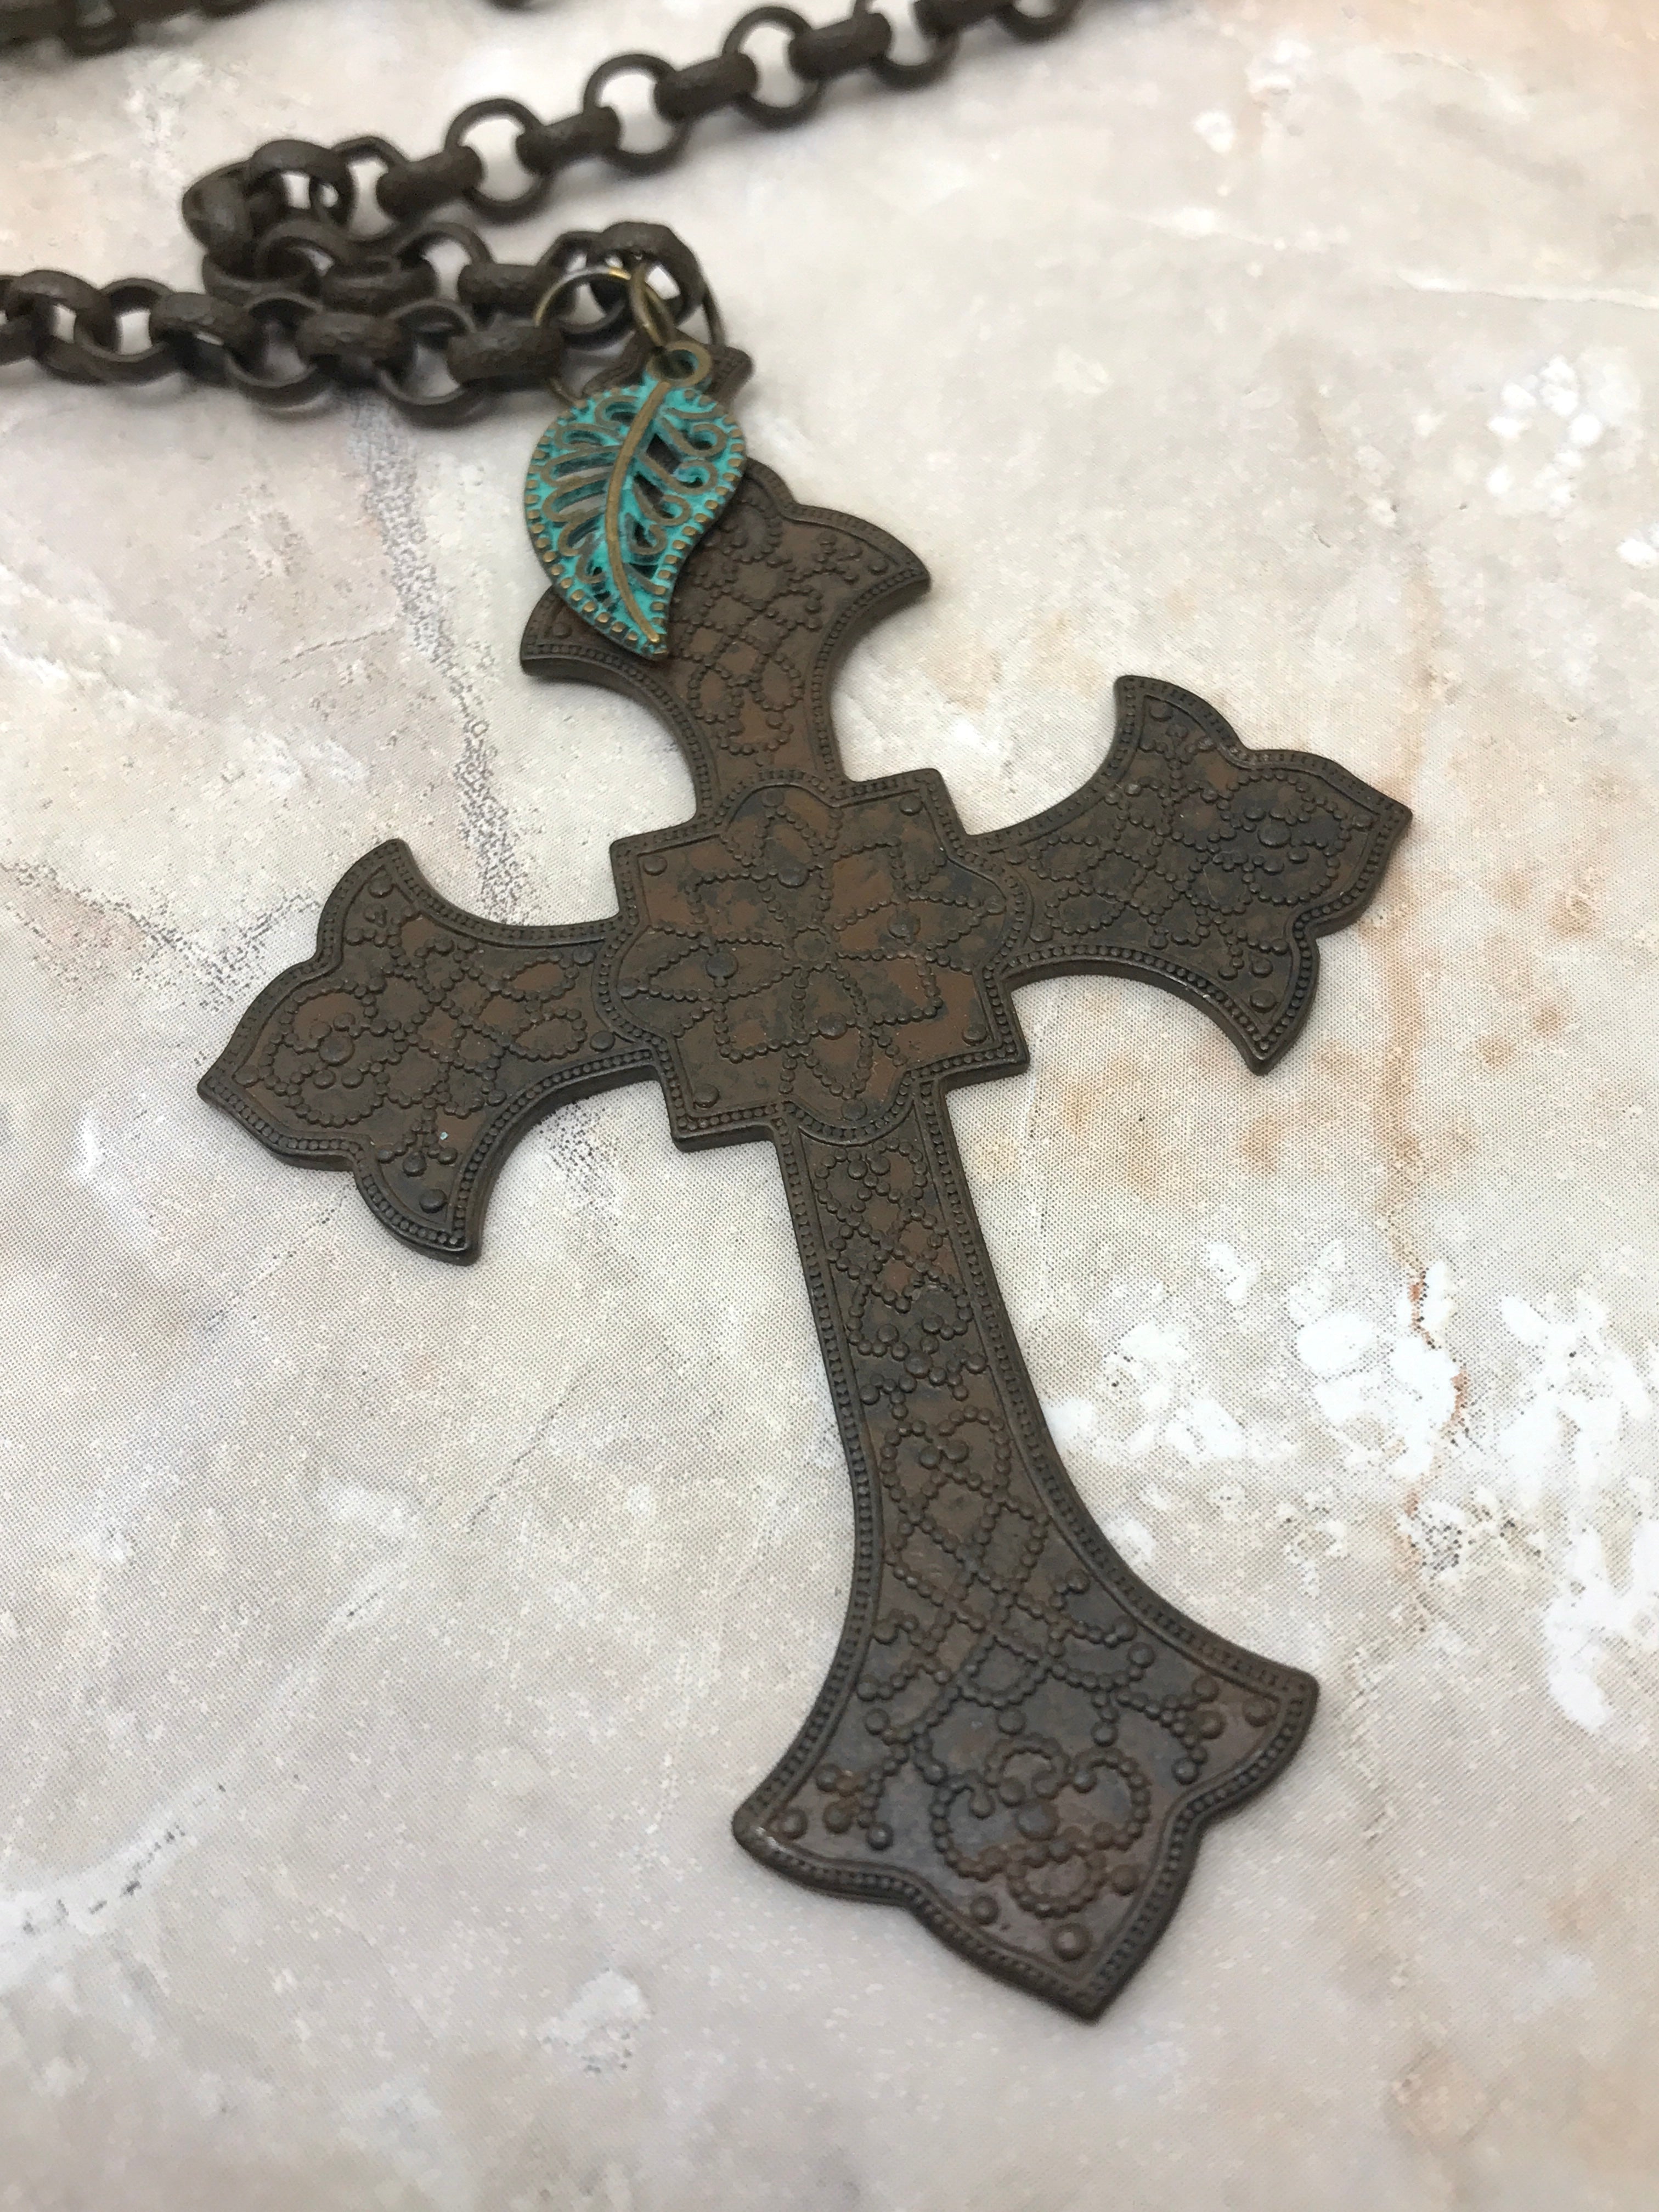 Rustic Boho Cross Necklace Copper Chain Crystal Pendant Hand Soldered  Briolette Religious Jewelry - AliExpress